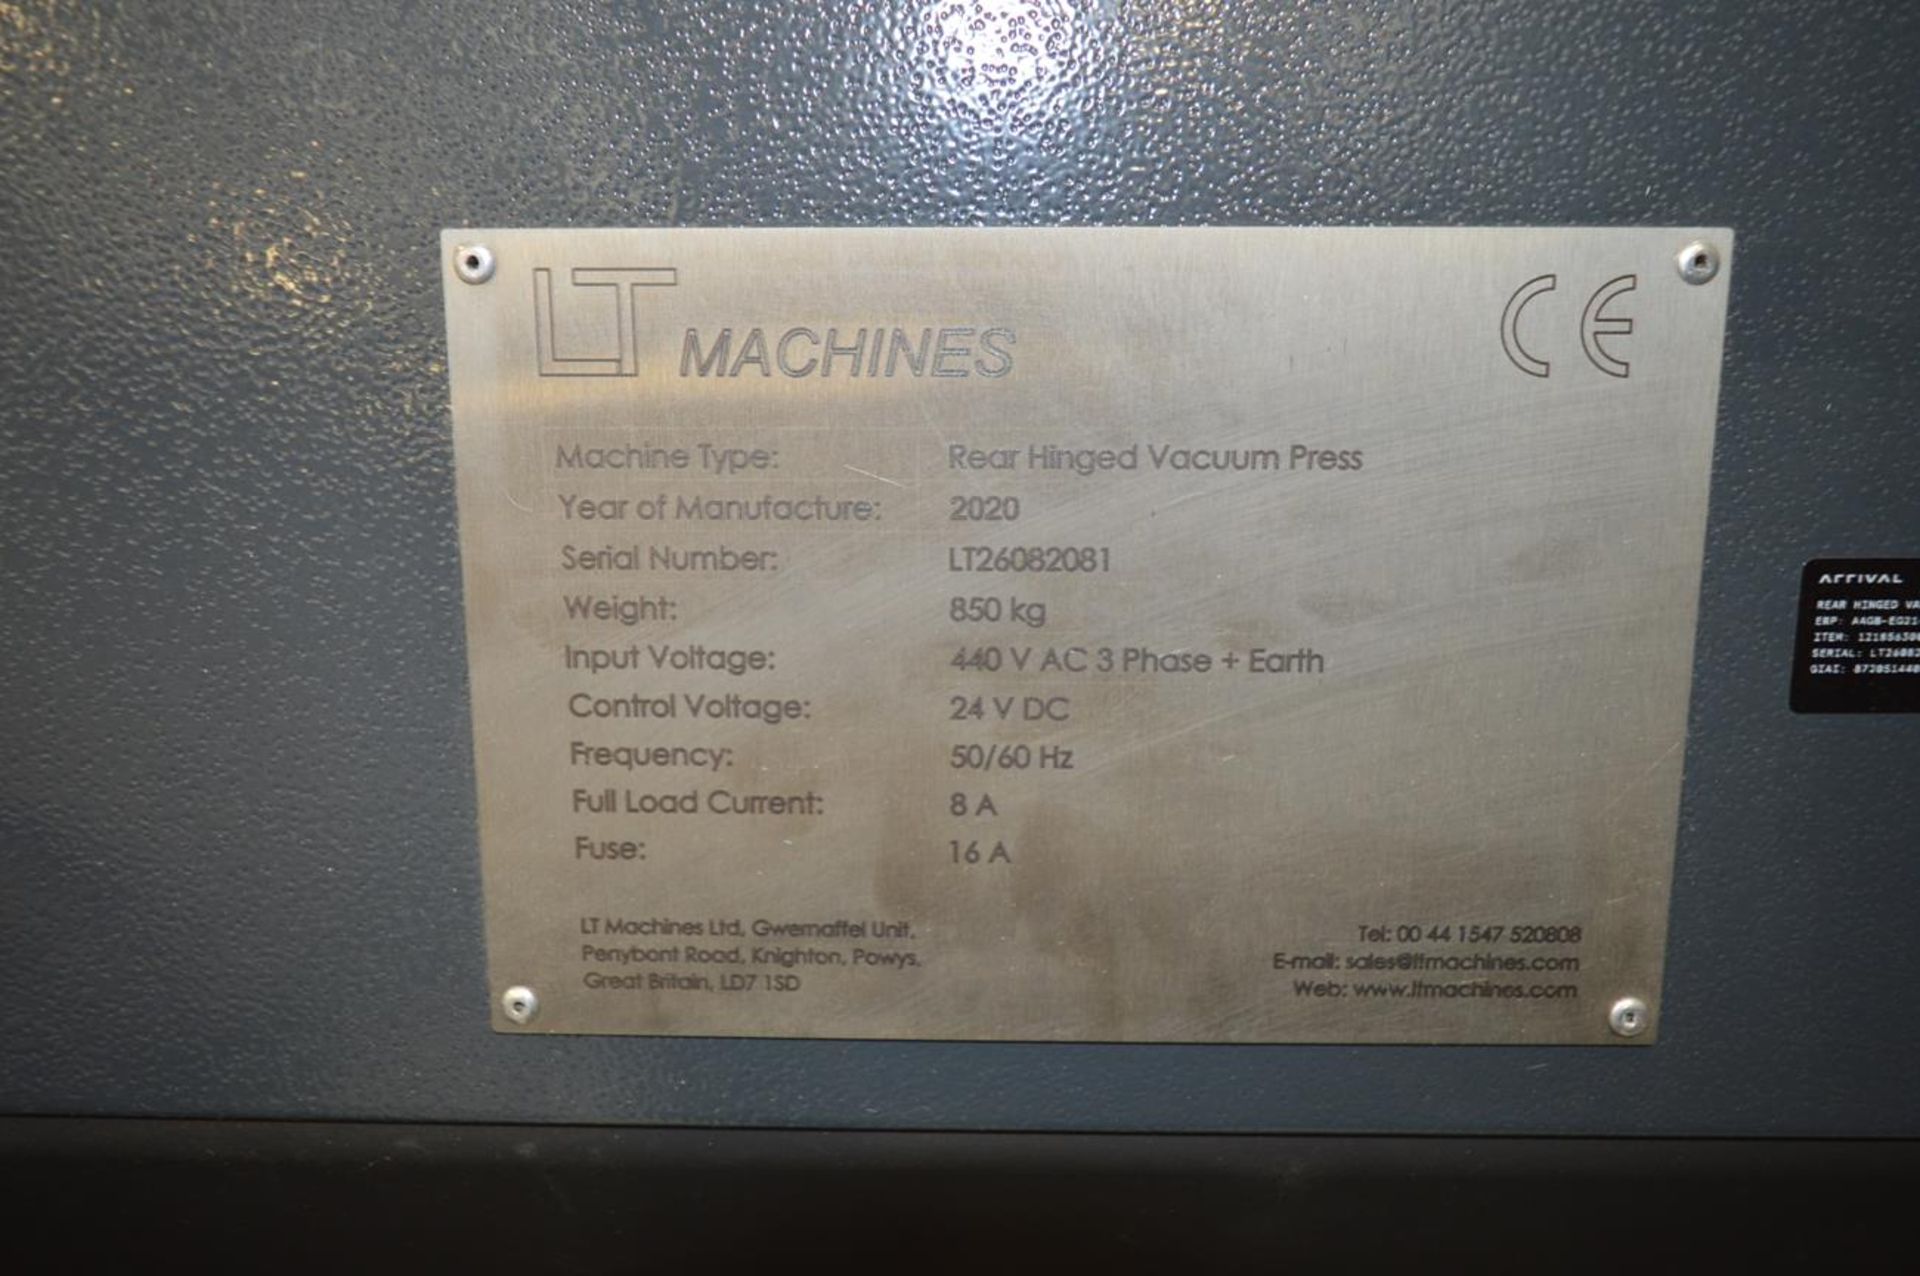 LT Machines, Infra Red rear hinged vacuum press, Serial No. LT26082081 (DOM: 2020) approx. capacity - Image 4 of 6